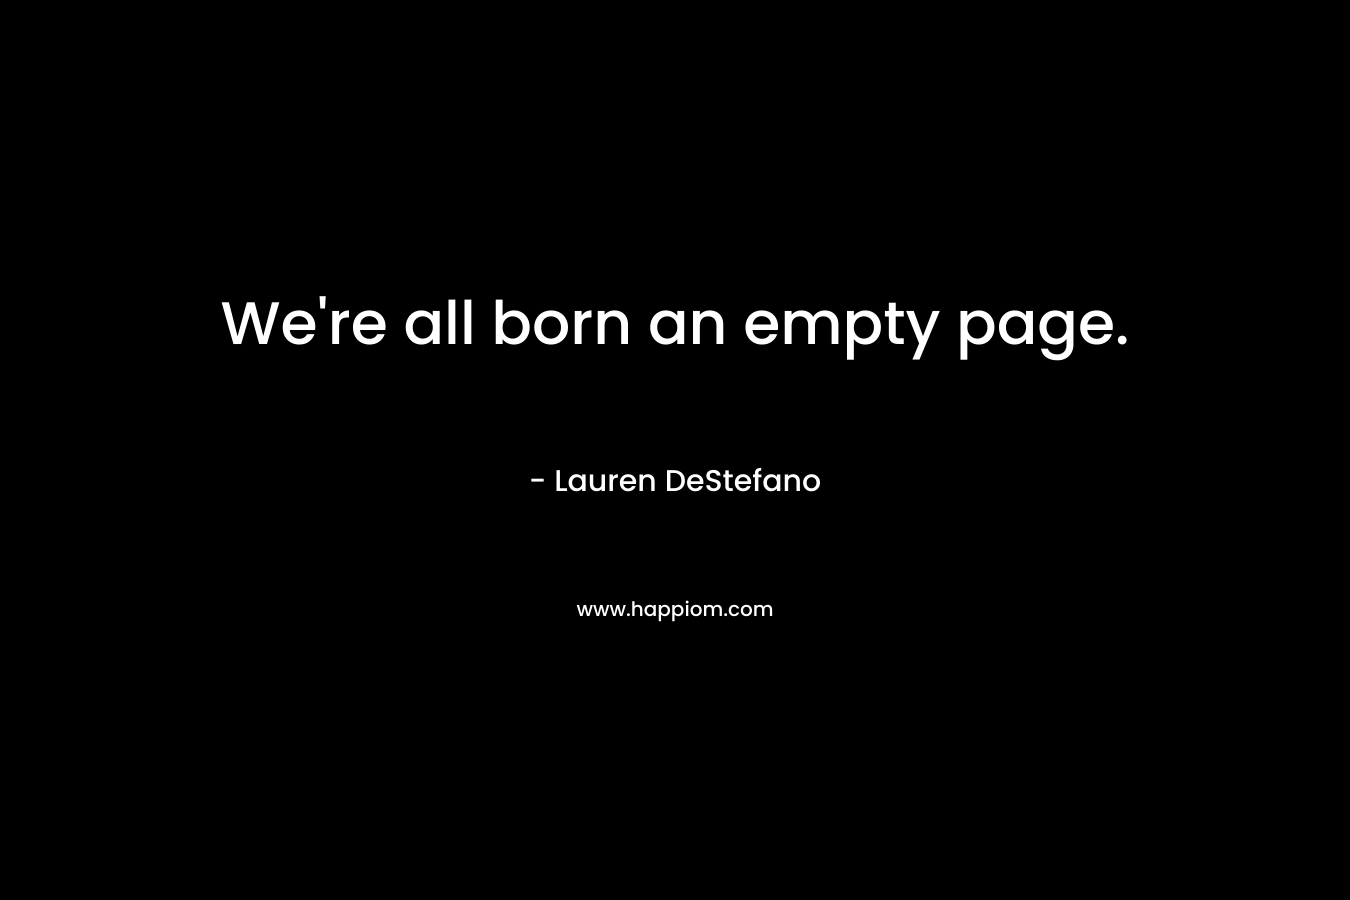 We're all born an empty page.